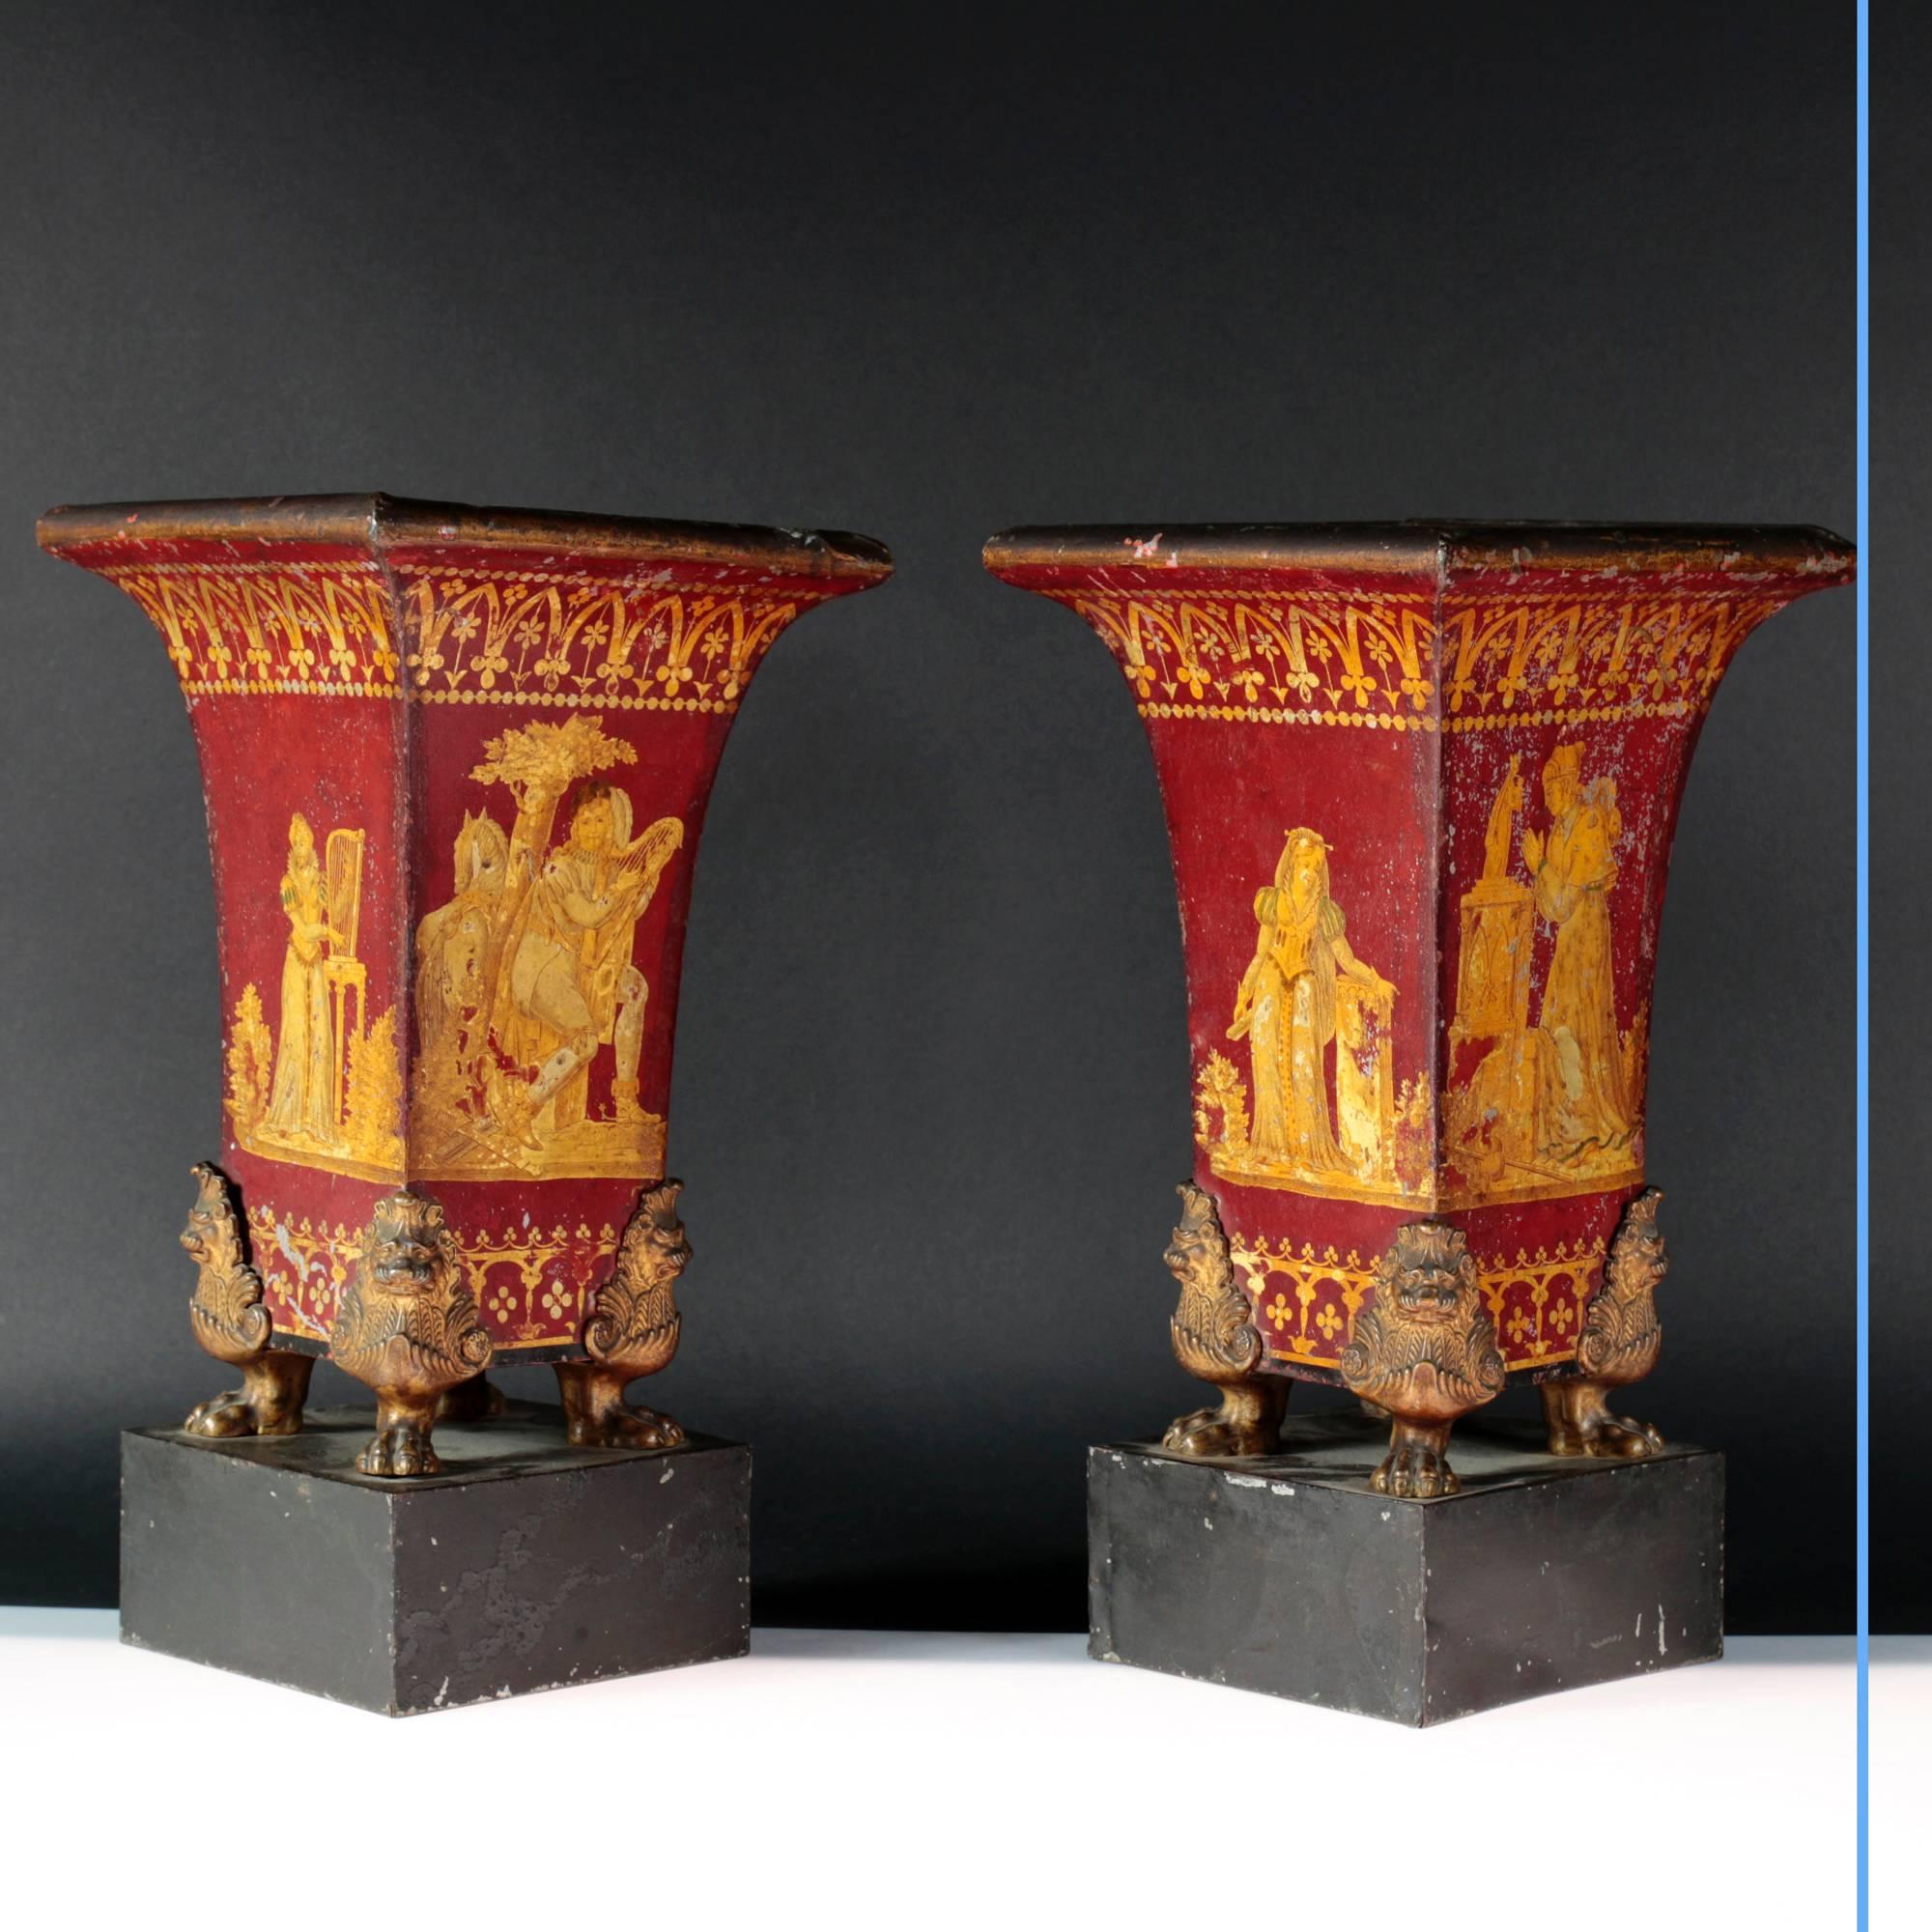 Pair of sheet metal vases in Gothic Revival style.
Painted and varnished sheet metal with gilded ornaments.
19th century,
circa 1830.
Measures: W 20.7 – H. 37.8 – D. 20.7 cm.

Pair of garden vases painted and varnished with gilded pattern,